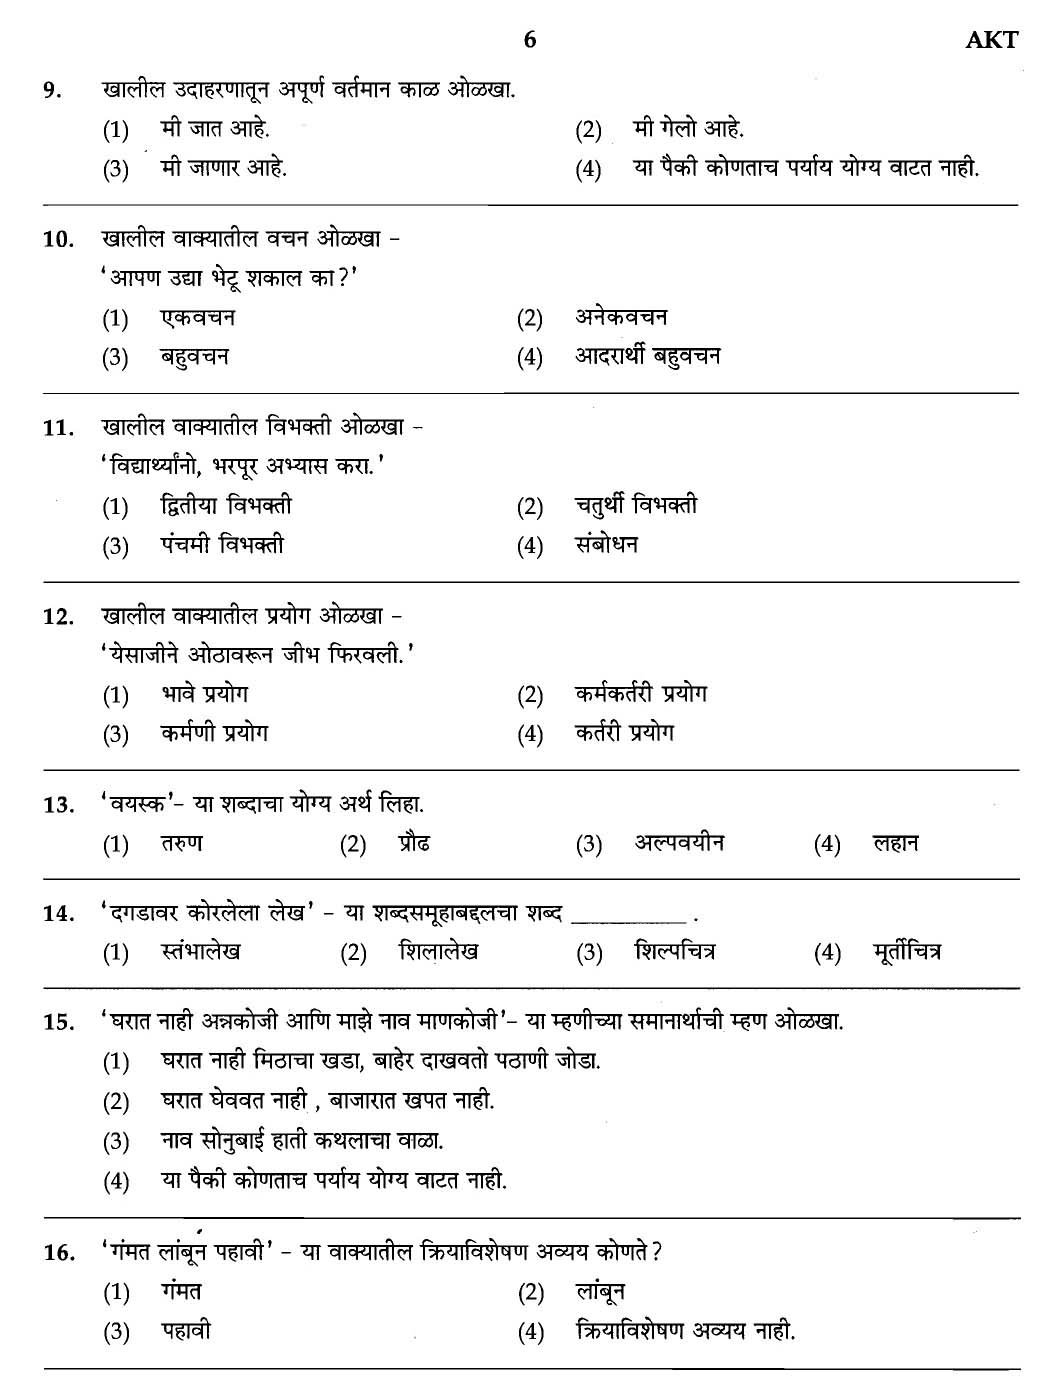 MPSC Agricultural Services Exam 2007 General Question Paper 4